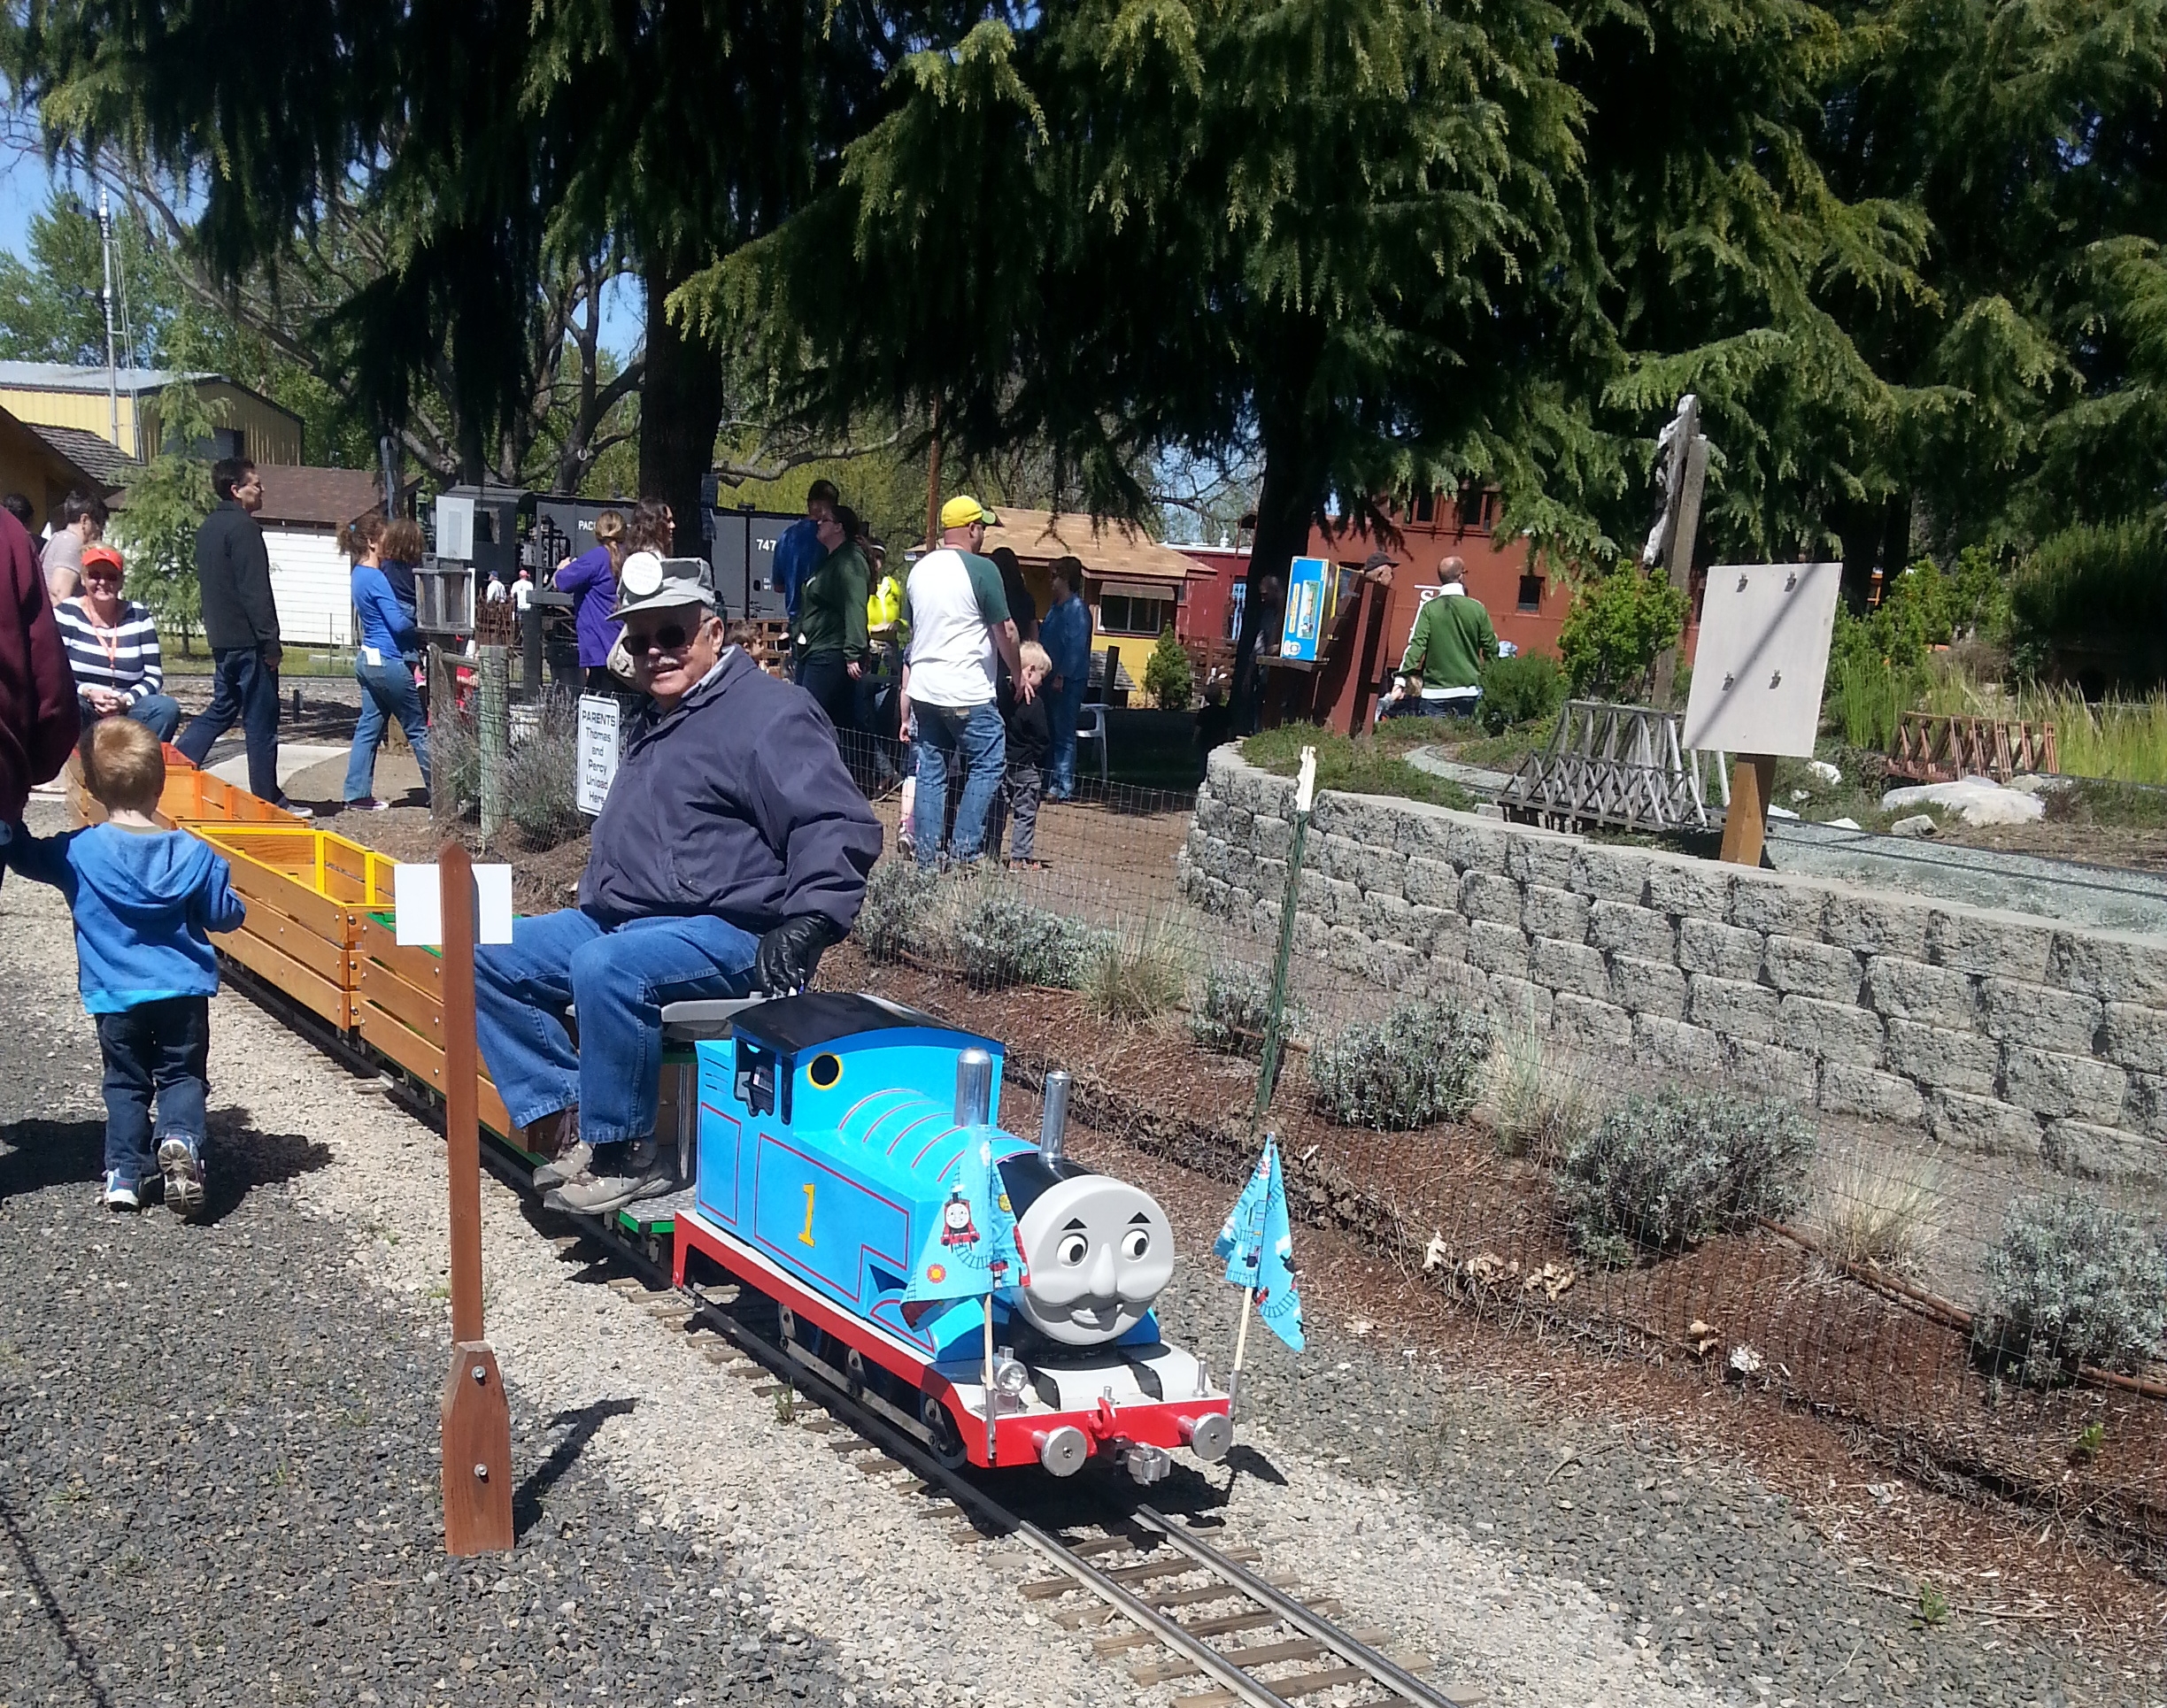 MEDFORD RAILROAD PARK - FREE FUN FOR THE WHOLE FAMILY - What to do in Southern Oregon- Things to do - Where to Have Birthday Parties